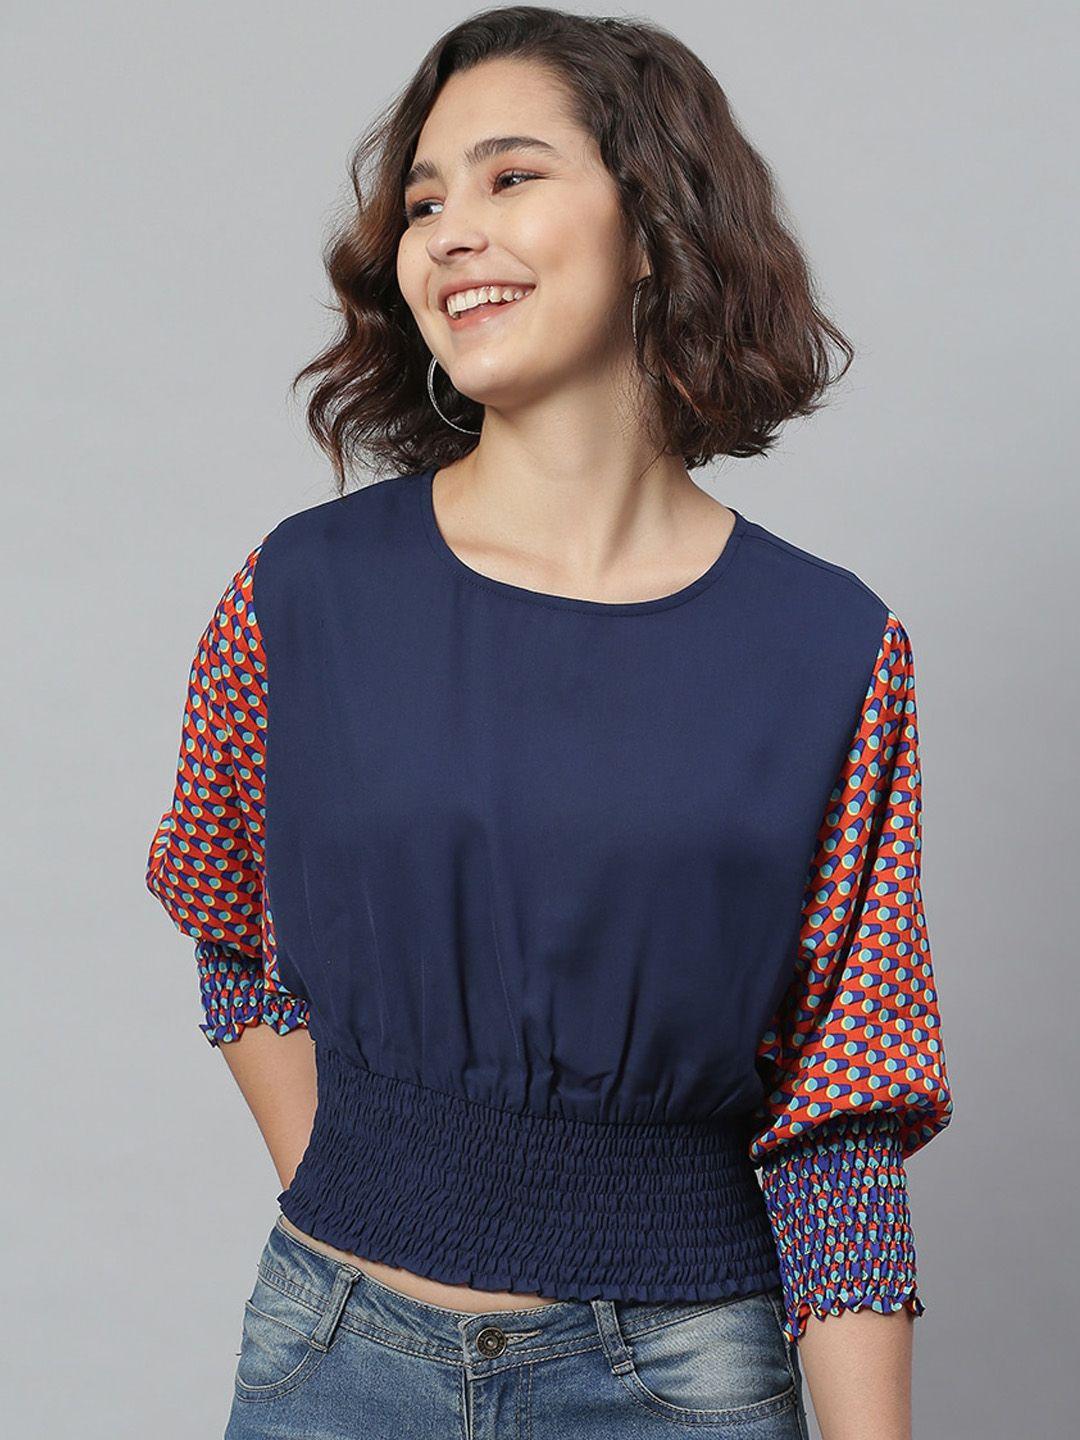 kassually navy blue crepe cinched waist top